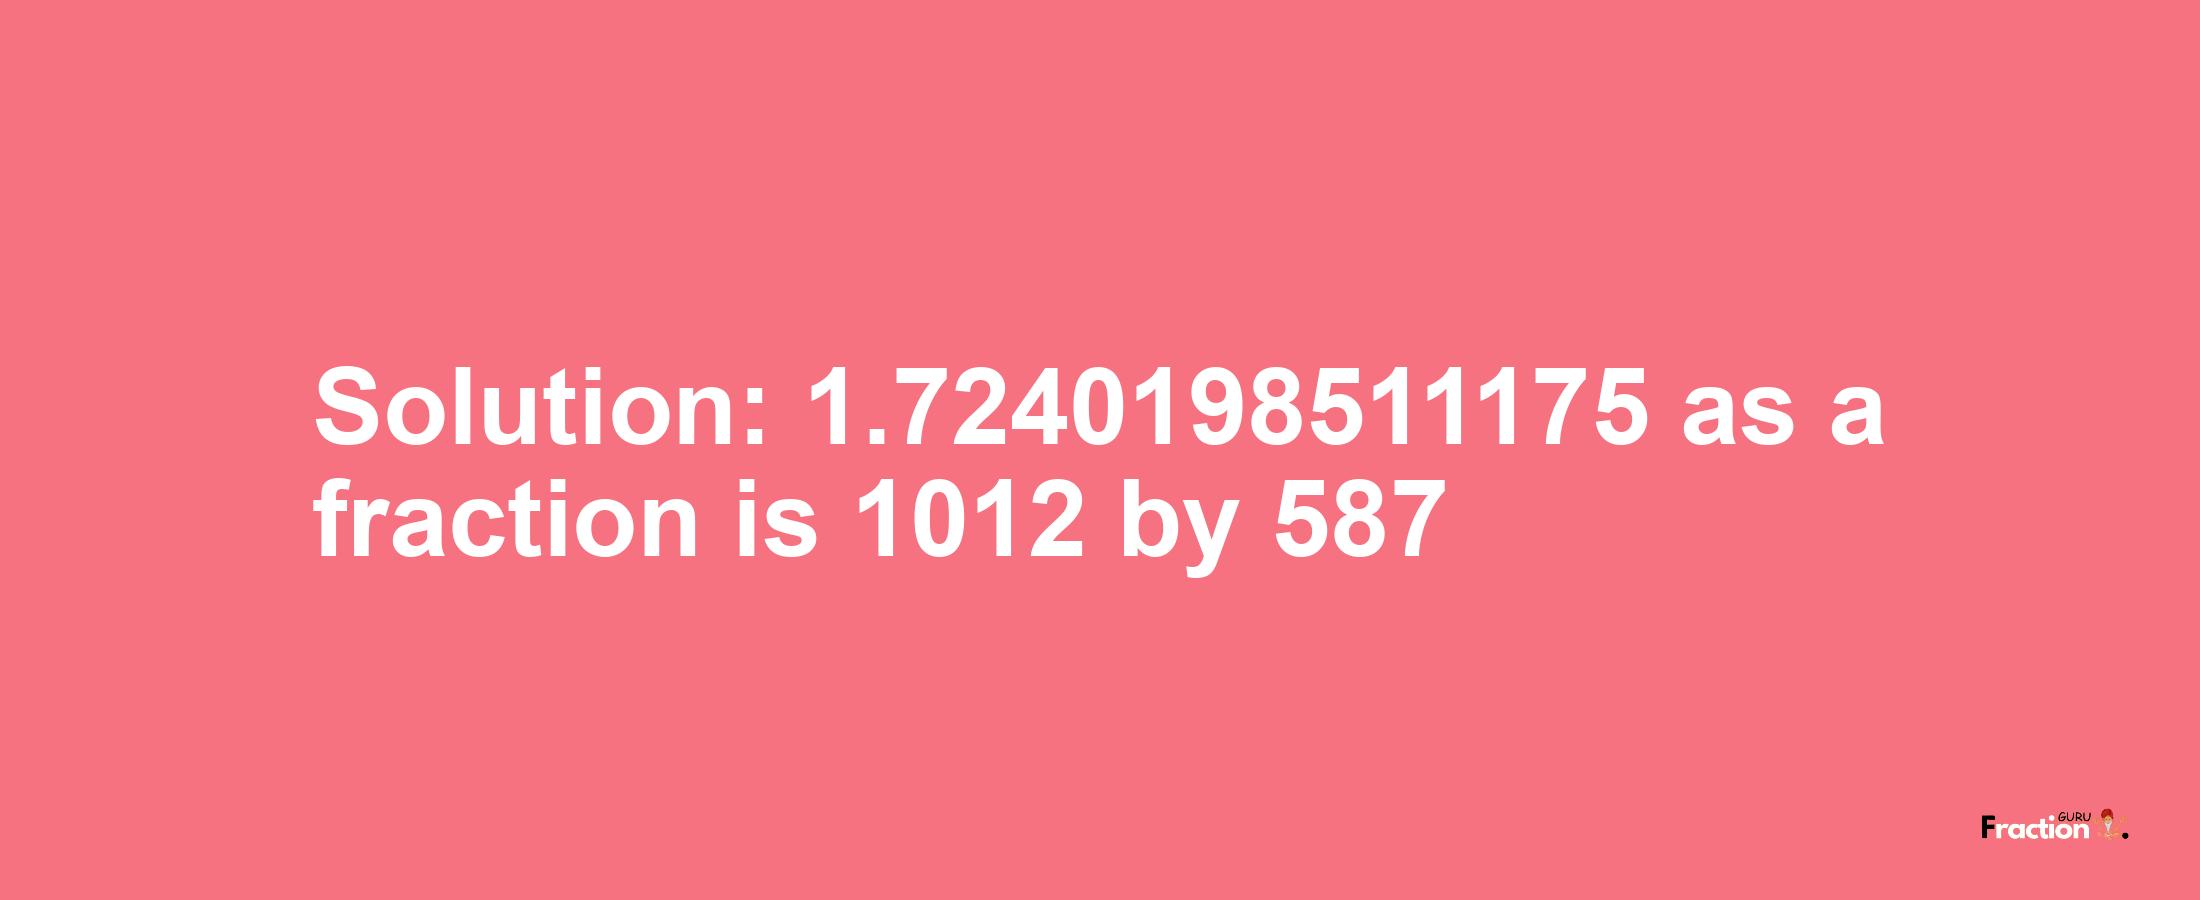 Solution:1.7240198511175 as a fraction is 1012/587